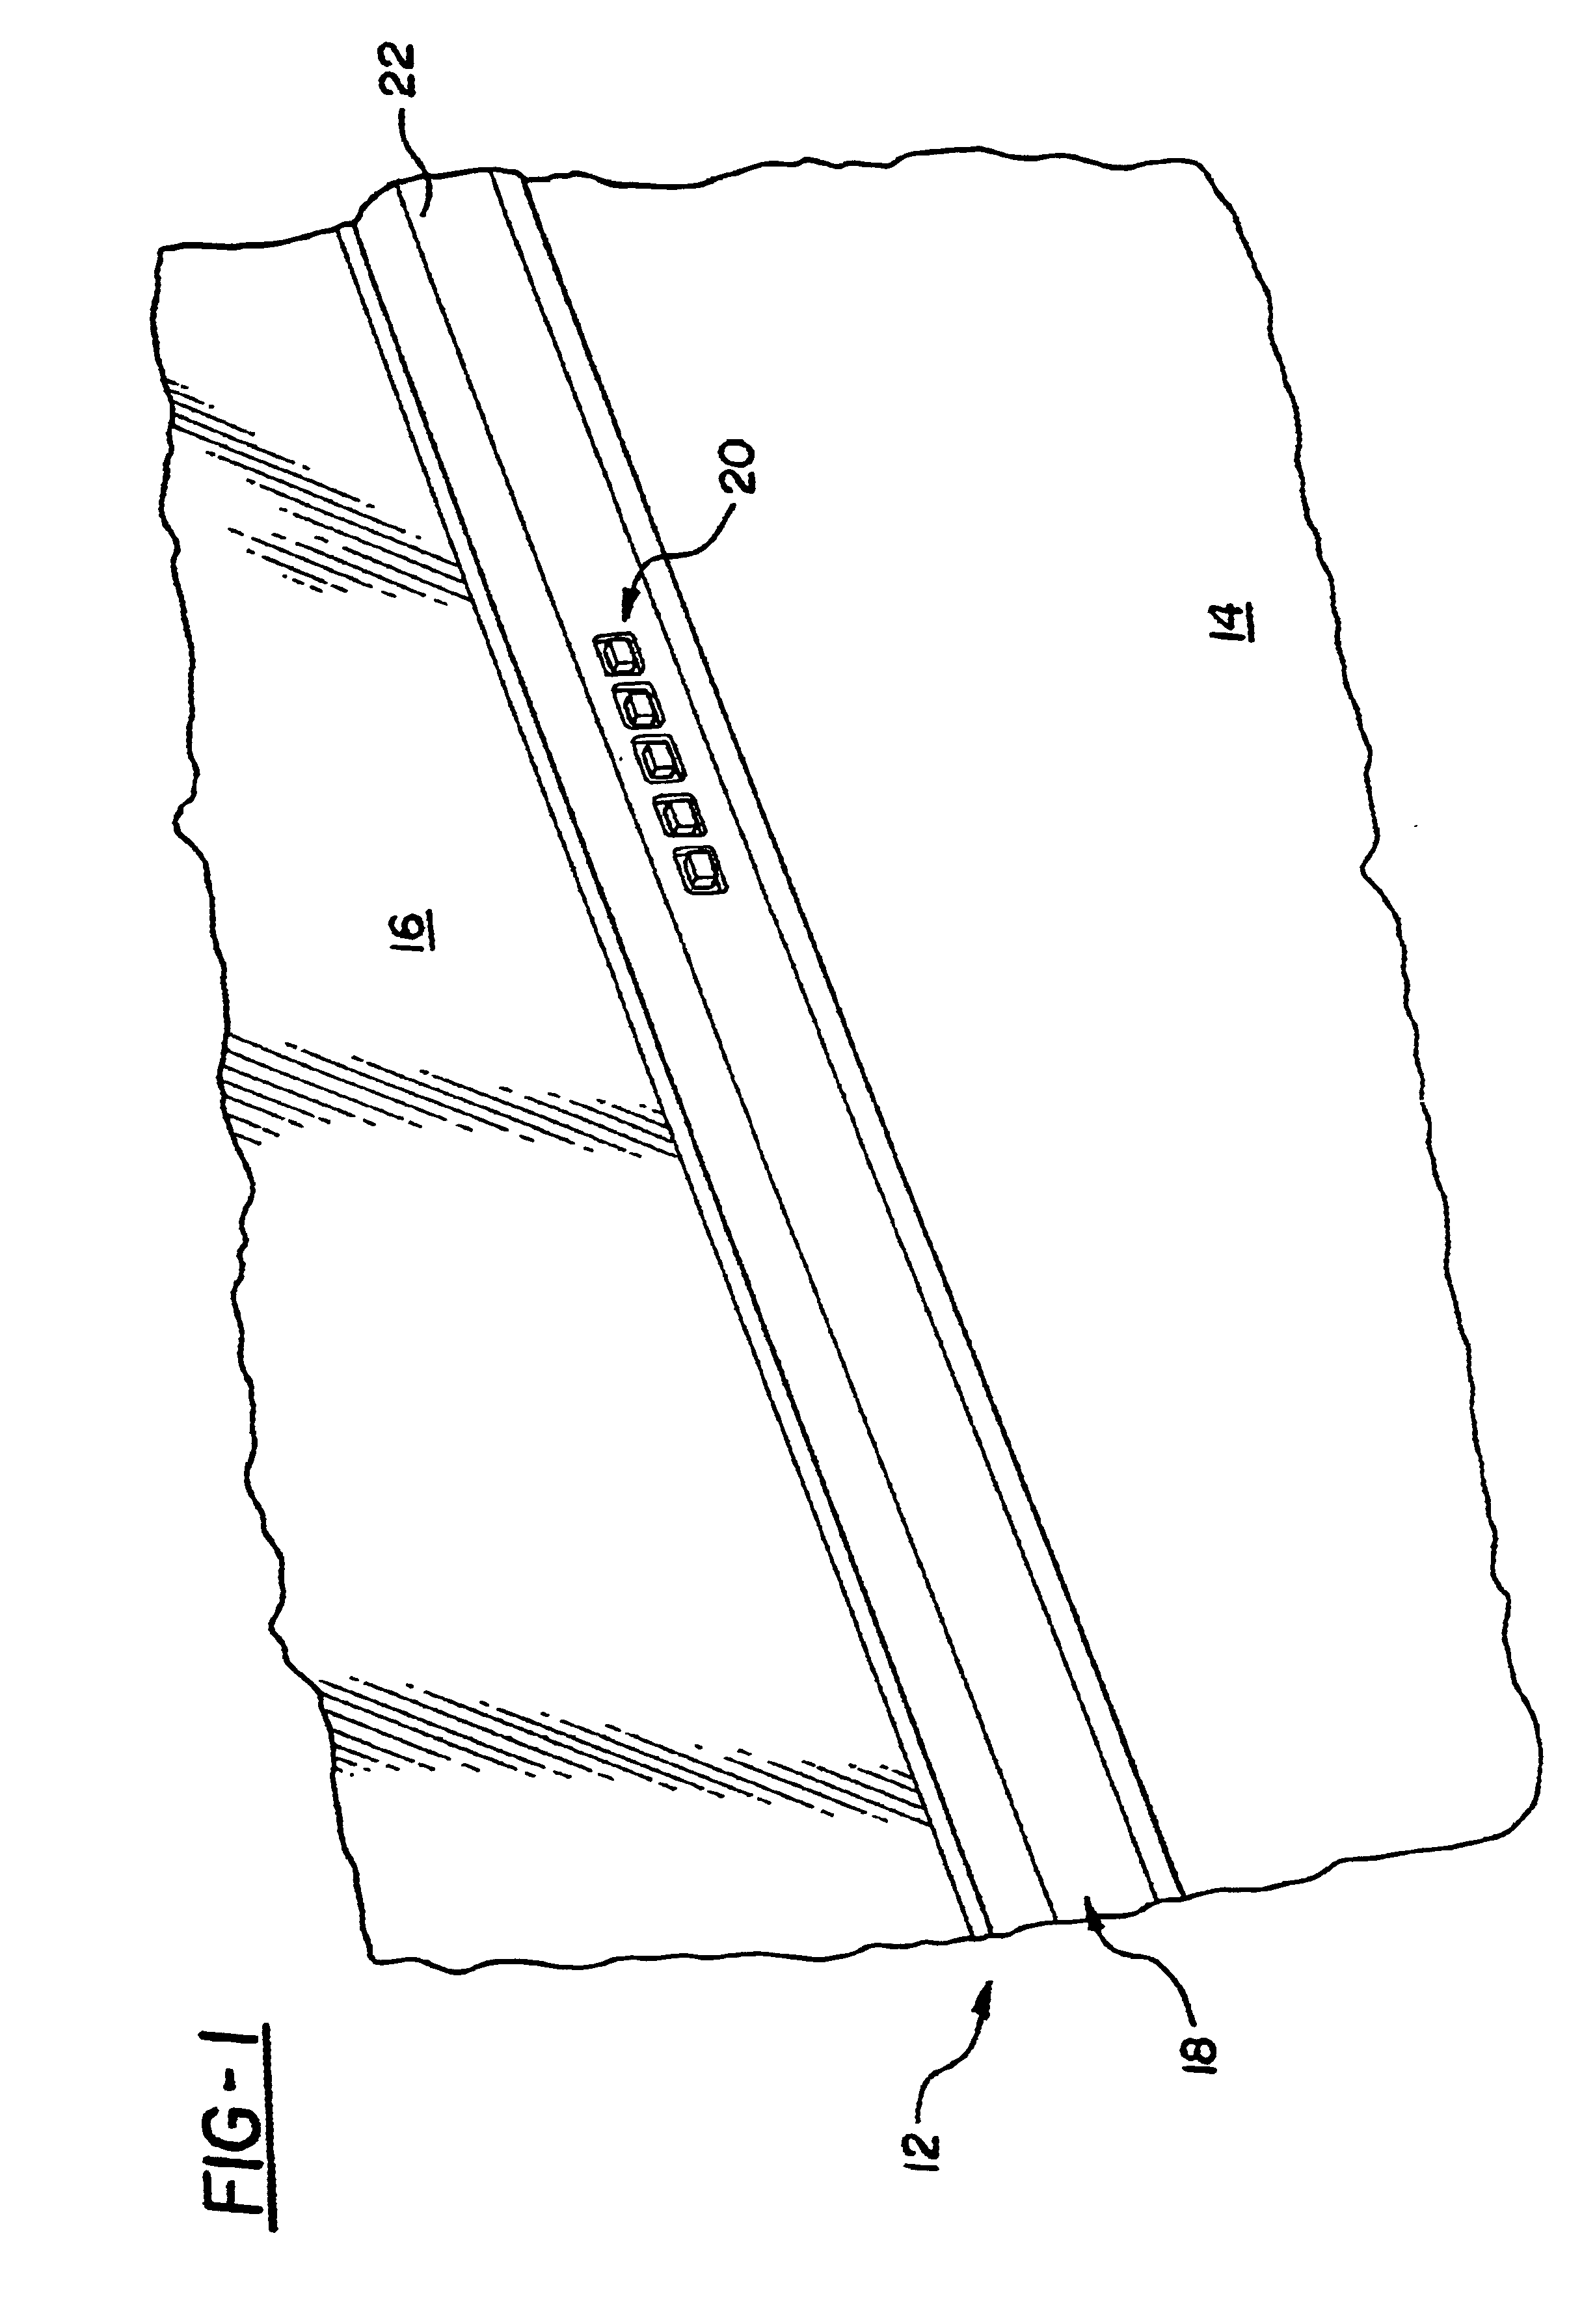 Retainer clip for attaching components to a belt molding